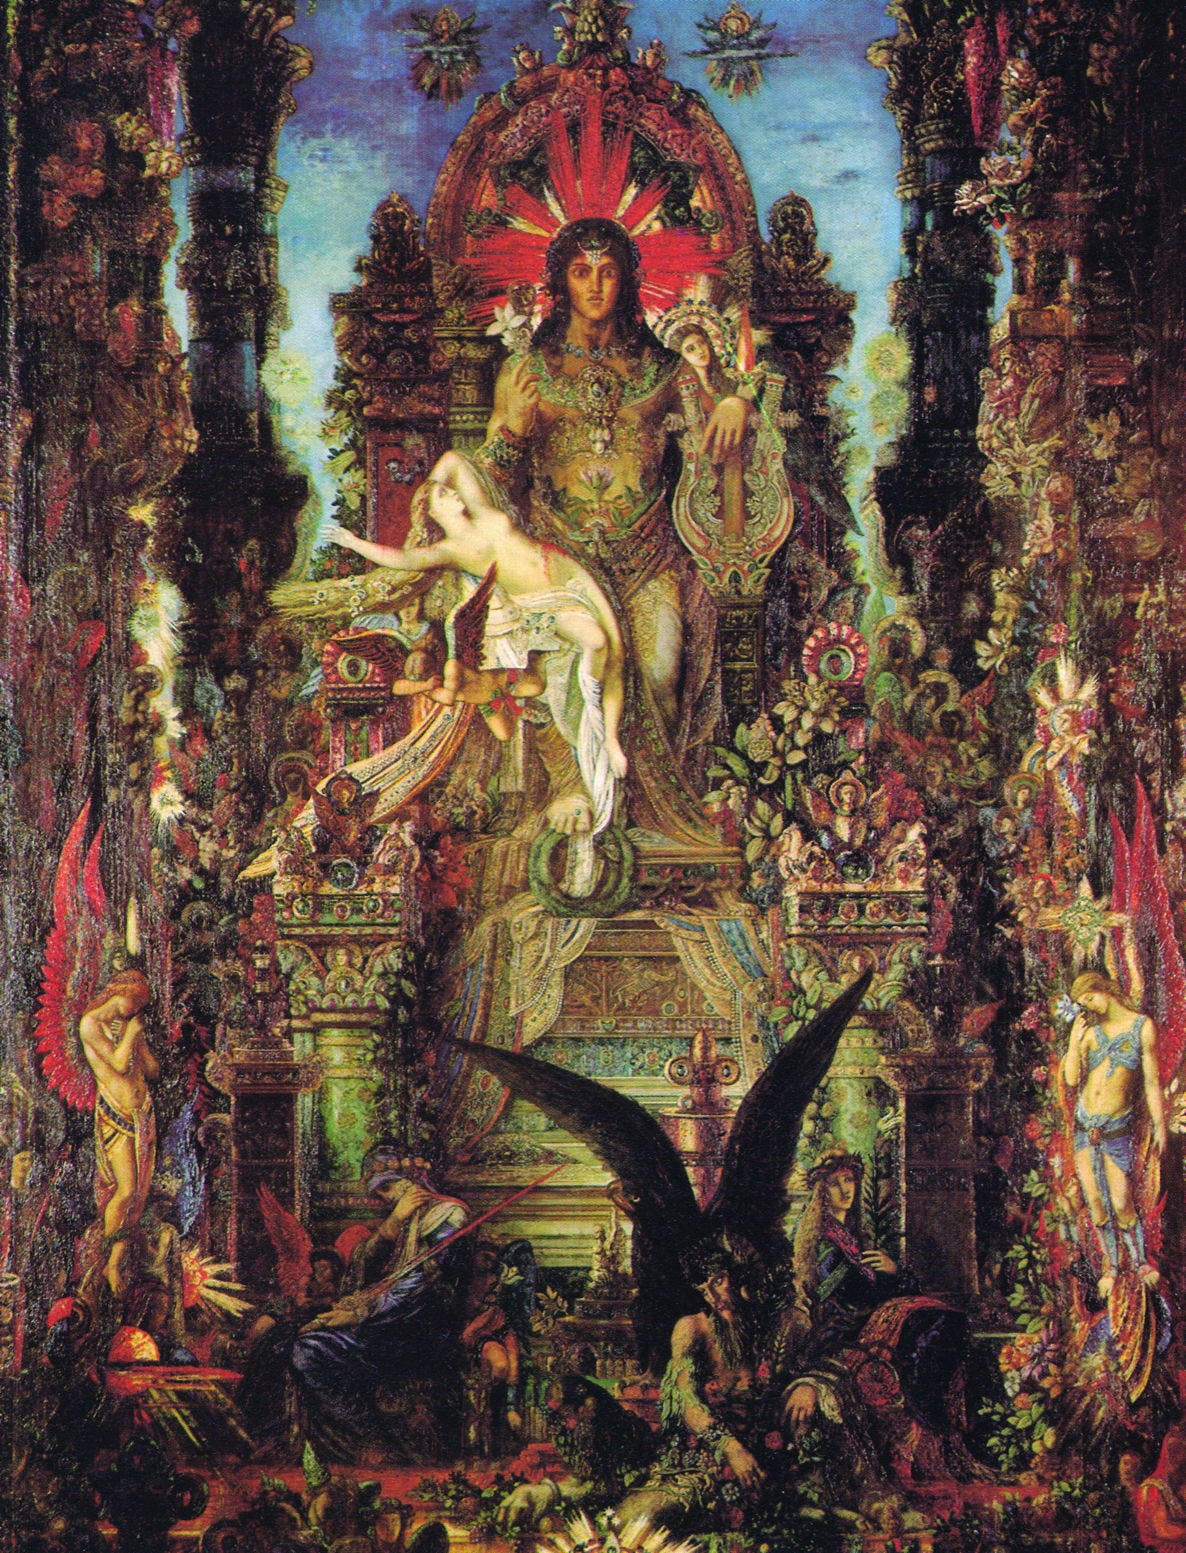 Hesiod's Brush, the paintings of Gustave Moreau: 1 Gathering storm – The  Eclectic Light Company